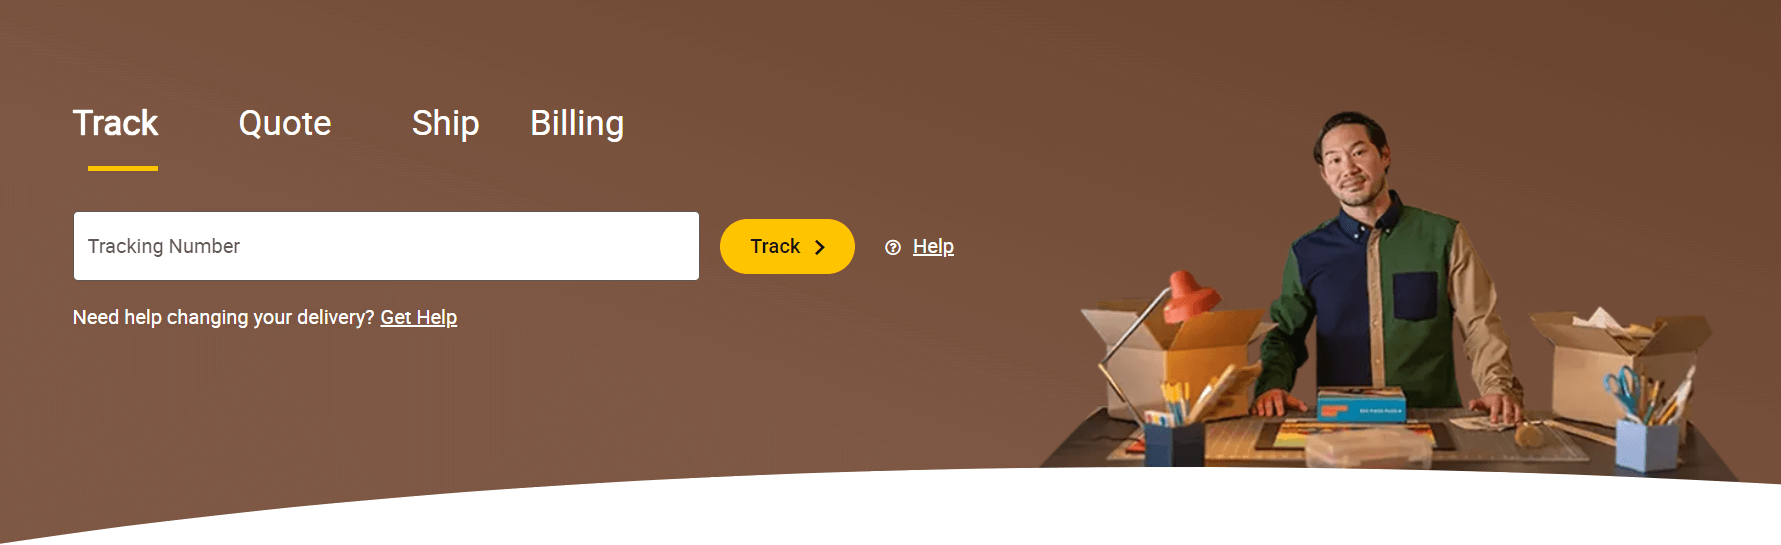 UPS tracking page